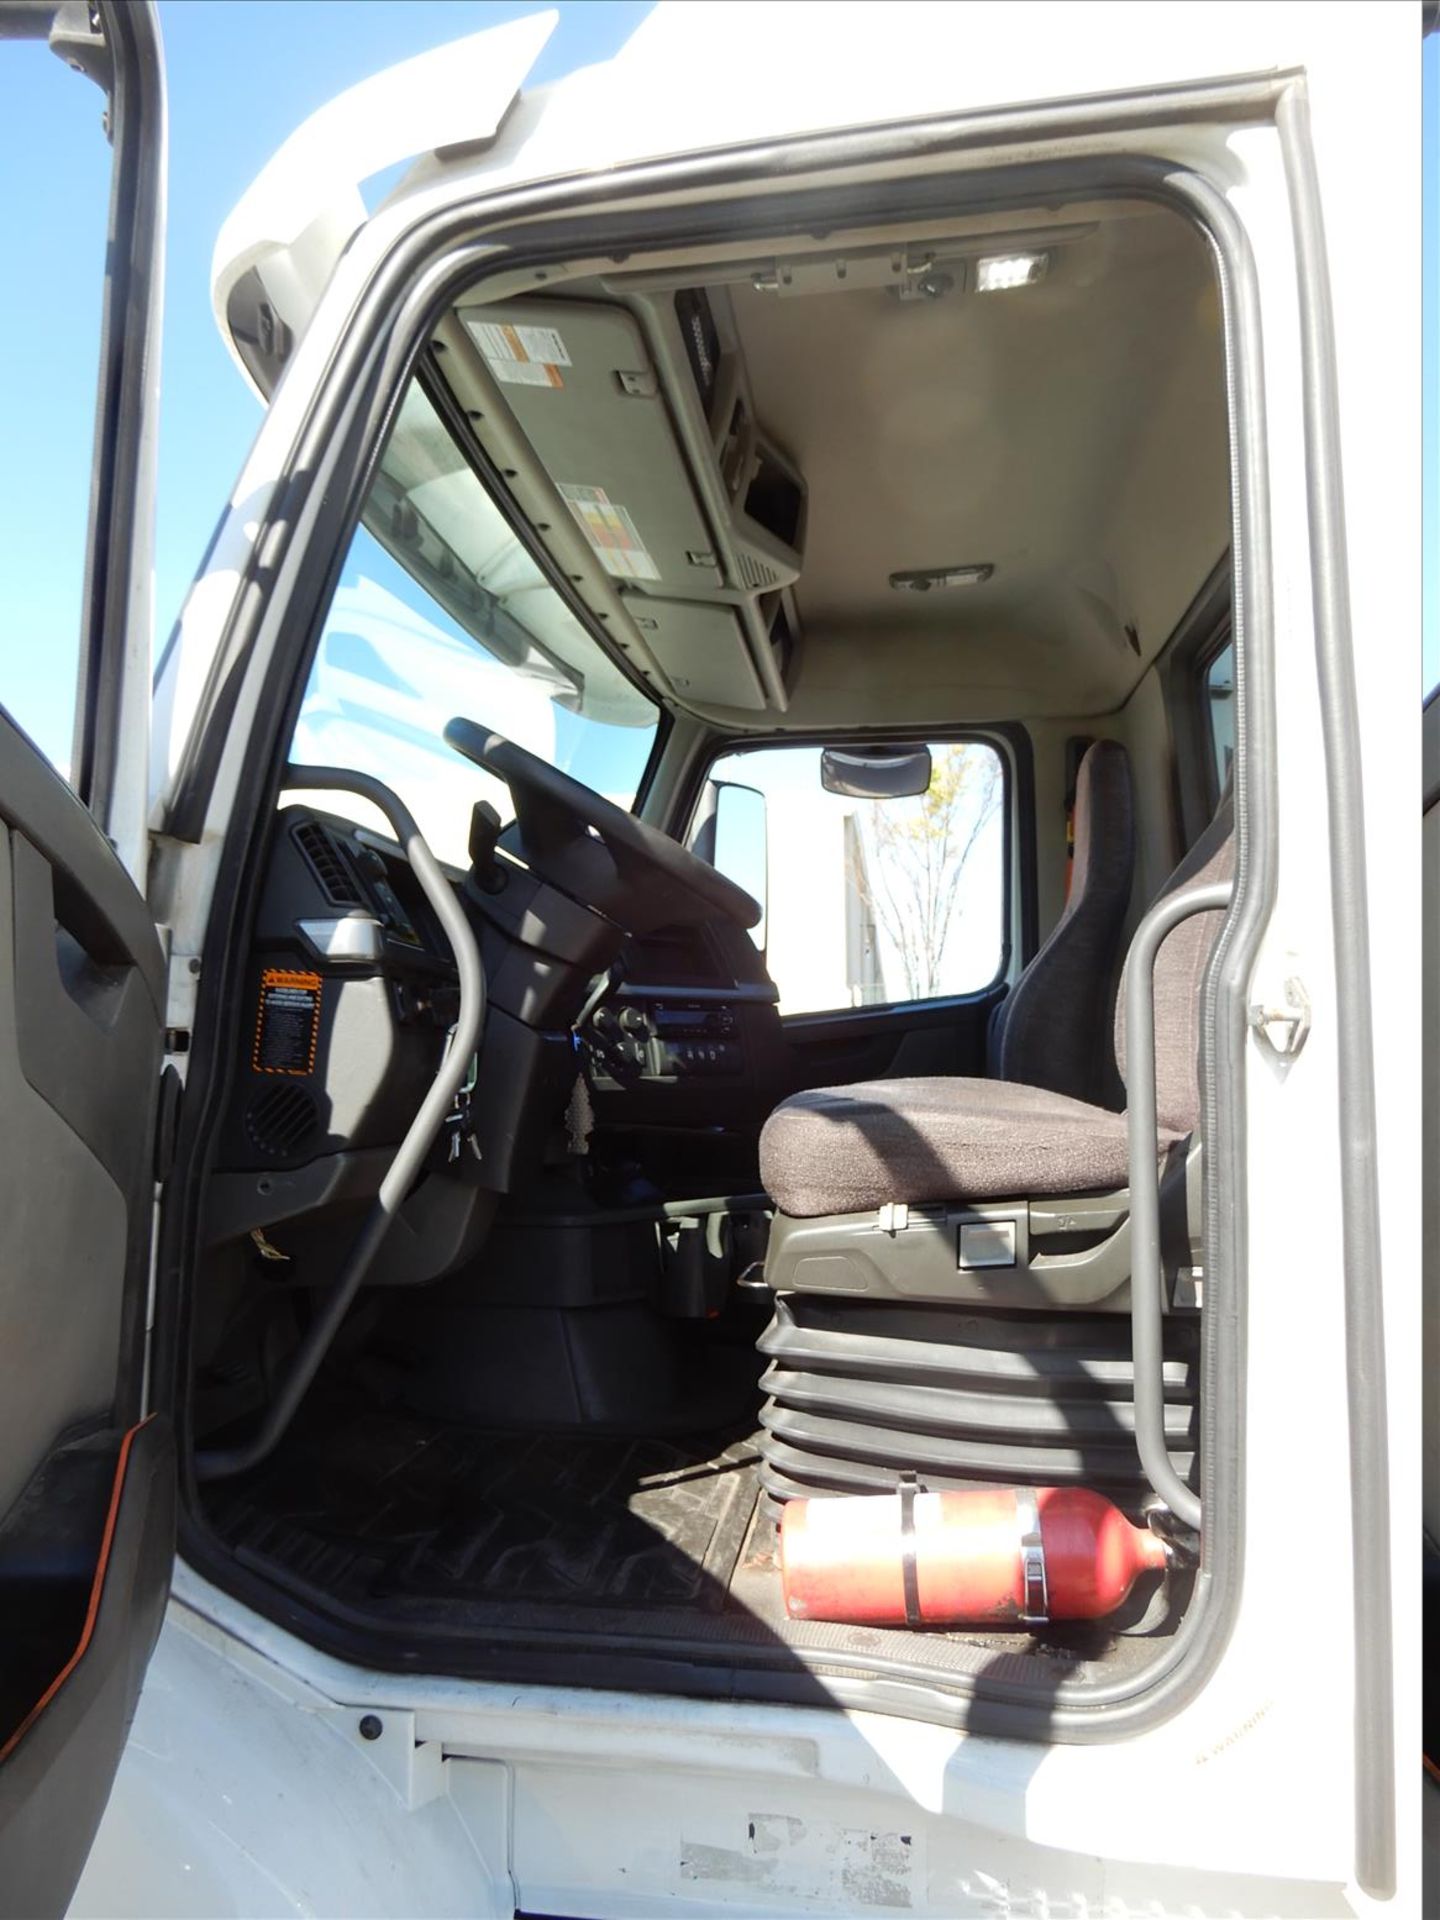 2020 Volvo VNR 300 Daycab Truck Tractor - Located in Murfreesboro, TN - Image 34 of 62